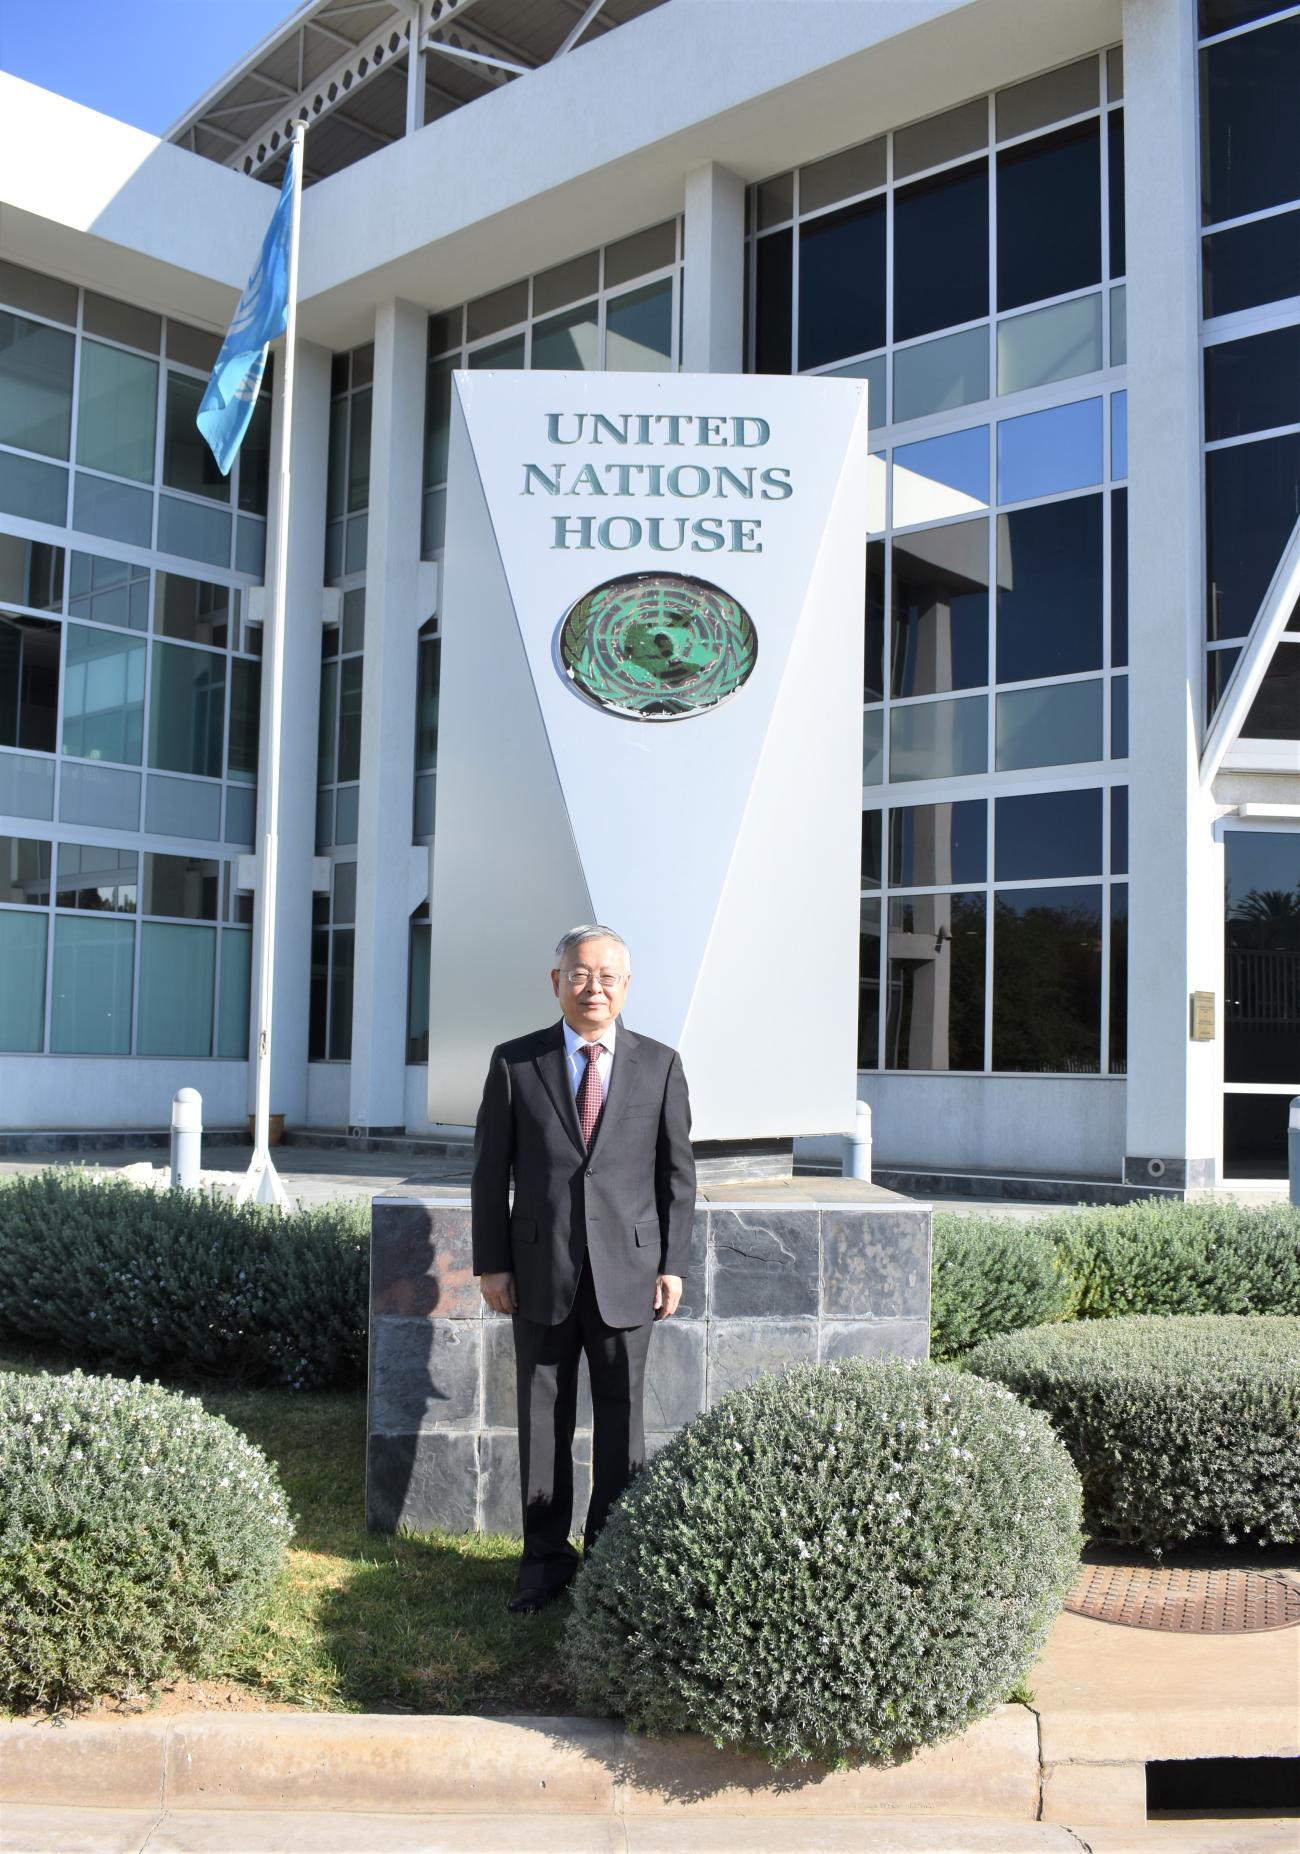 UN Resident Coordinator, Sen Pang pictured infront of the UN House in Namibia